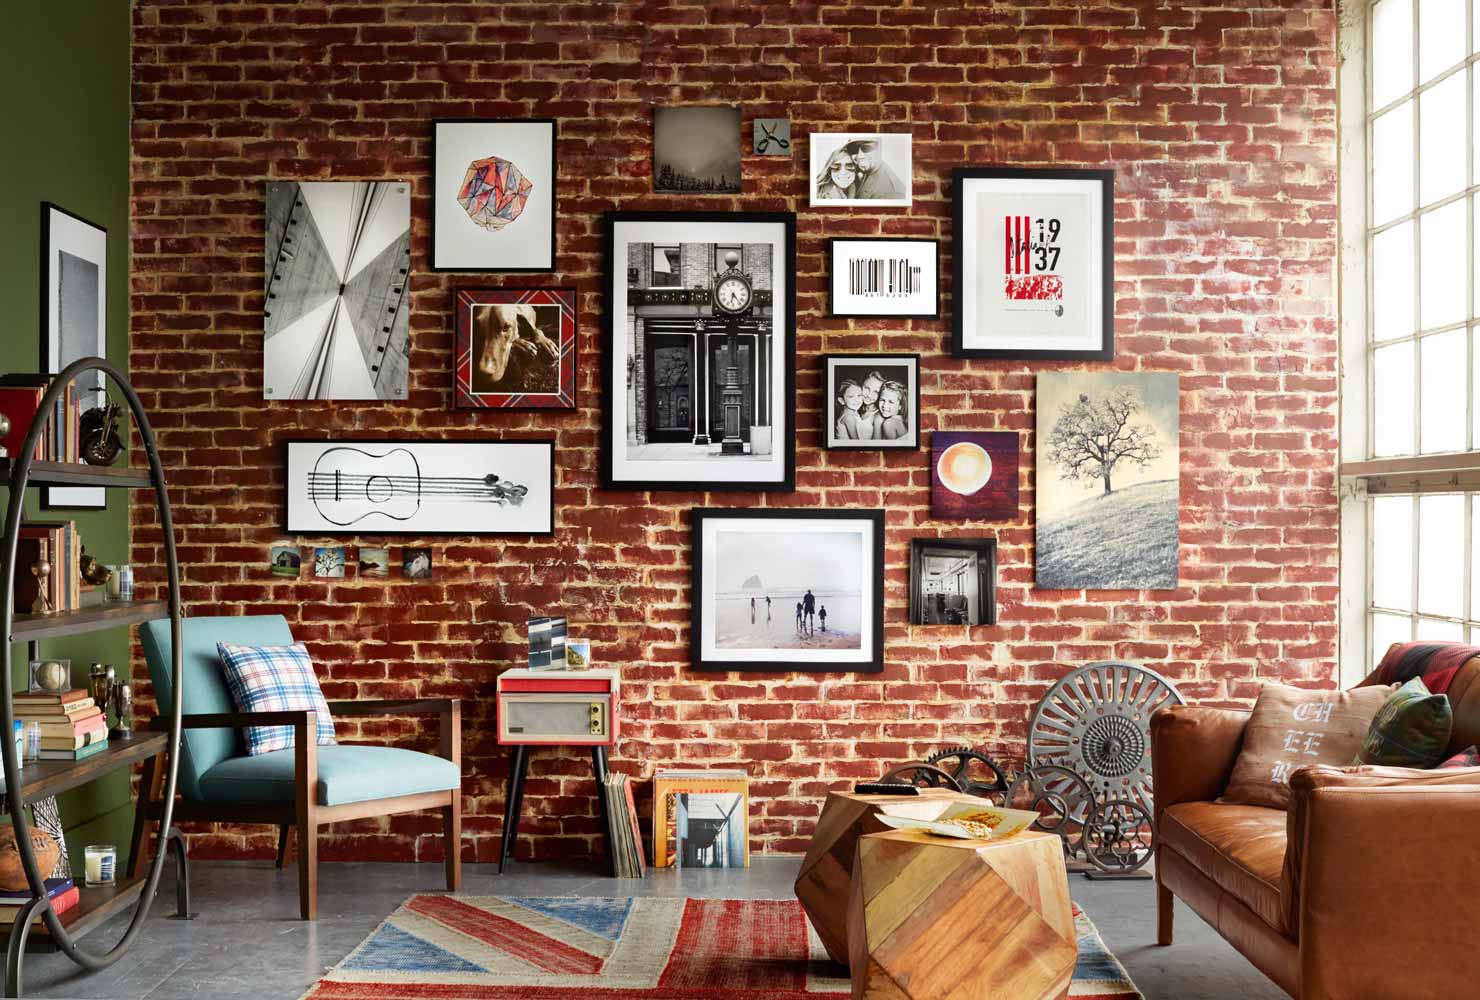 Brick wall with hanging pictures.